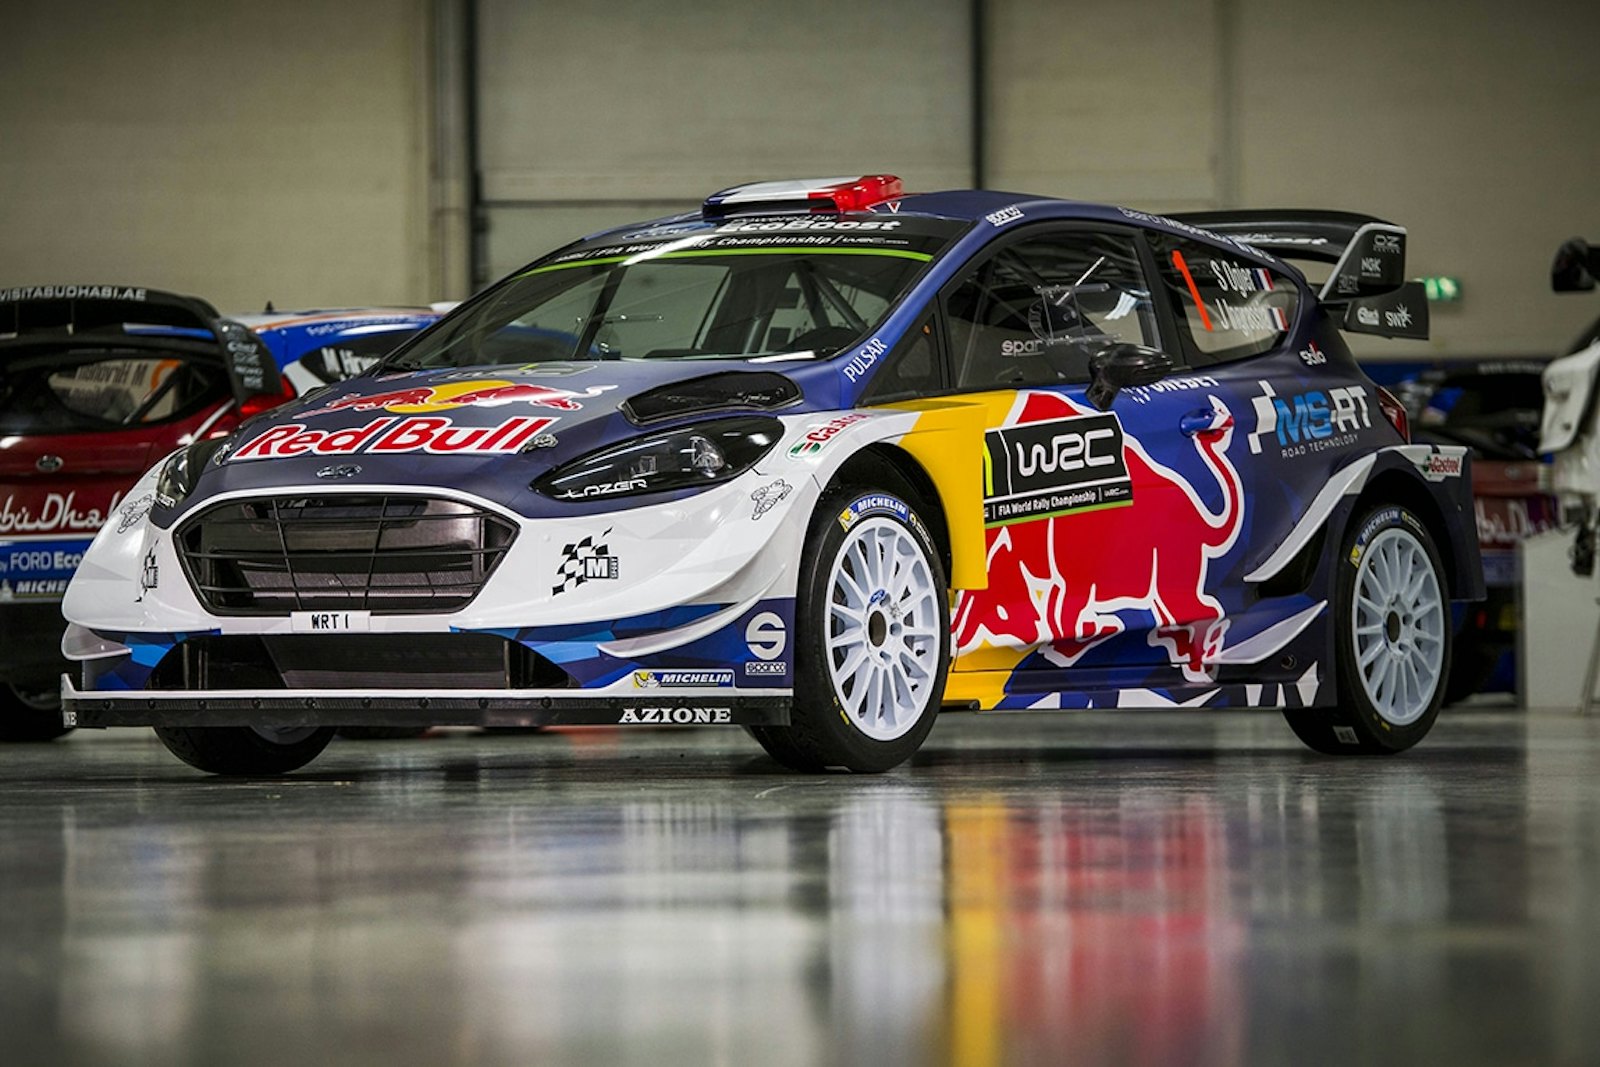 M-Sport reveal the new livery for their 2017 EcoBoost-powered Ford Fiesta which will be driven by four-time World Rally Champion Sebastien Ogier. // M-Sport/Red Bull Content Pool // P-20161223-00951 // Usage for editorial use only // Please go to www.redbullcontentpool.com for further information. //